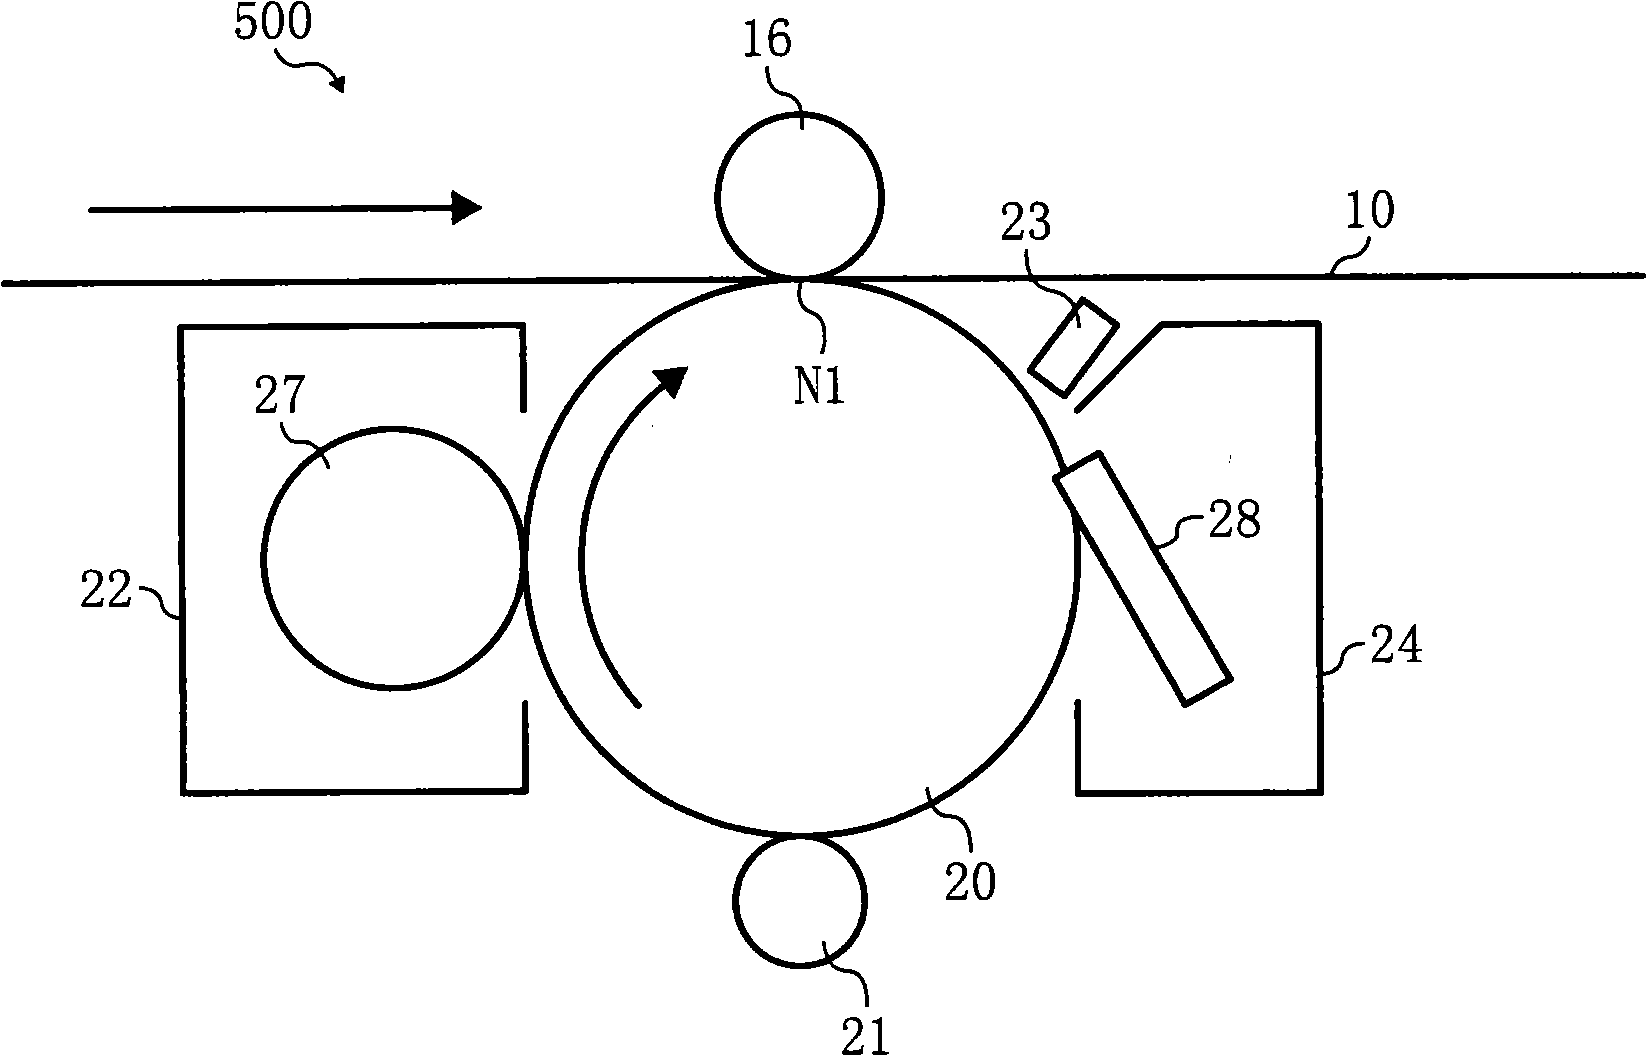 Image forming device